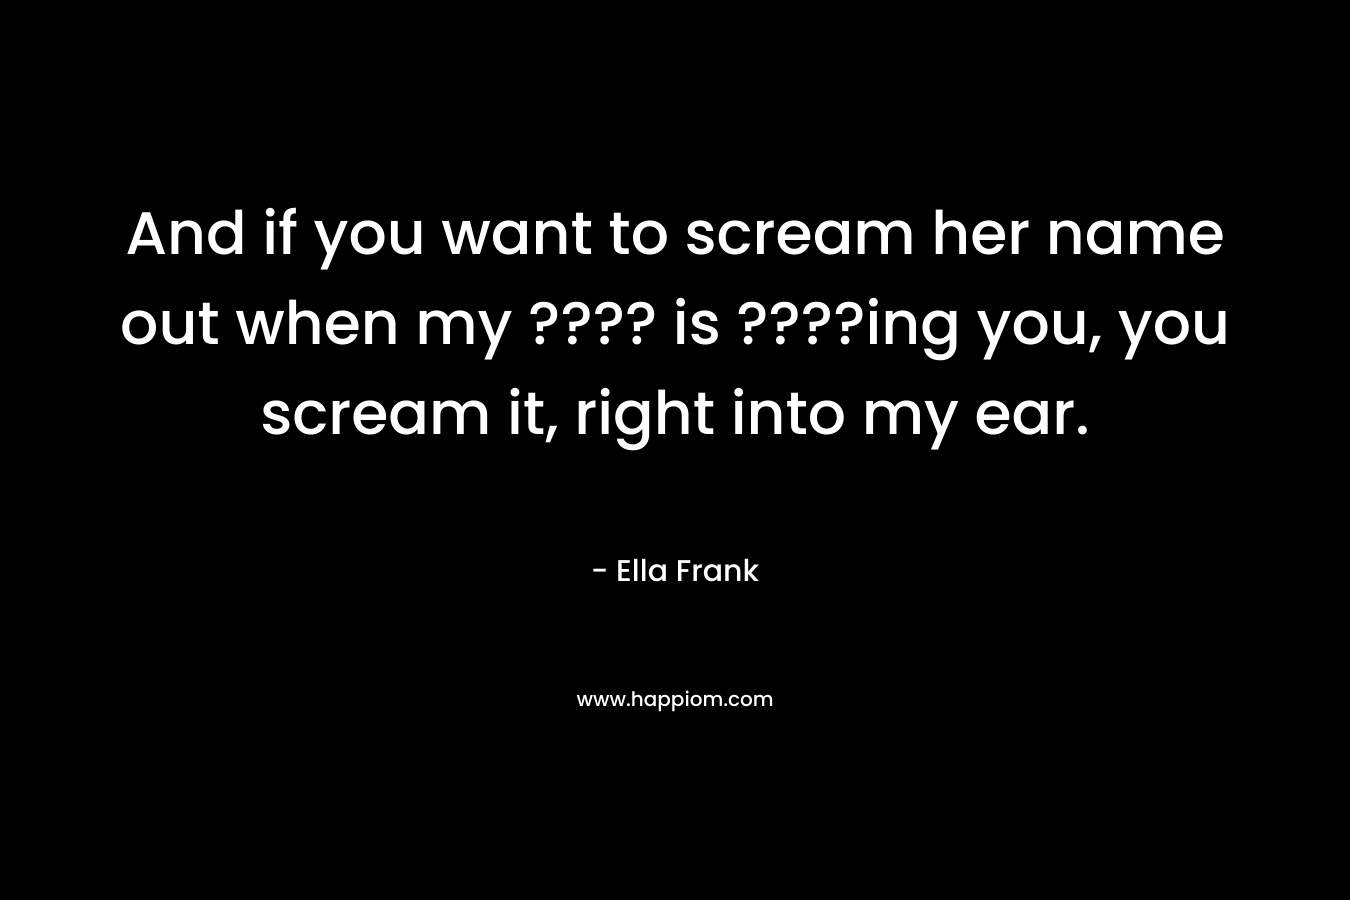 And if you want to scream her name out when my ???? is ????ing you, you scream it, right into my ear.